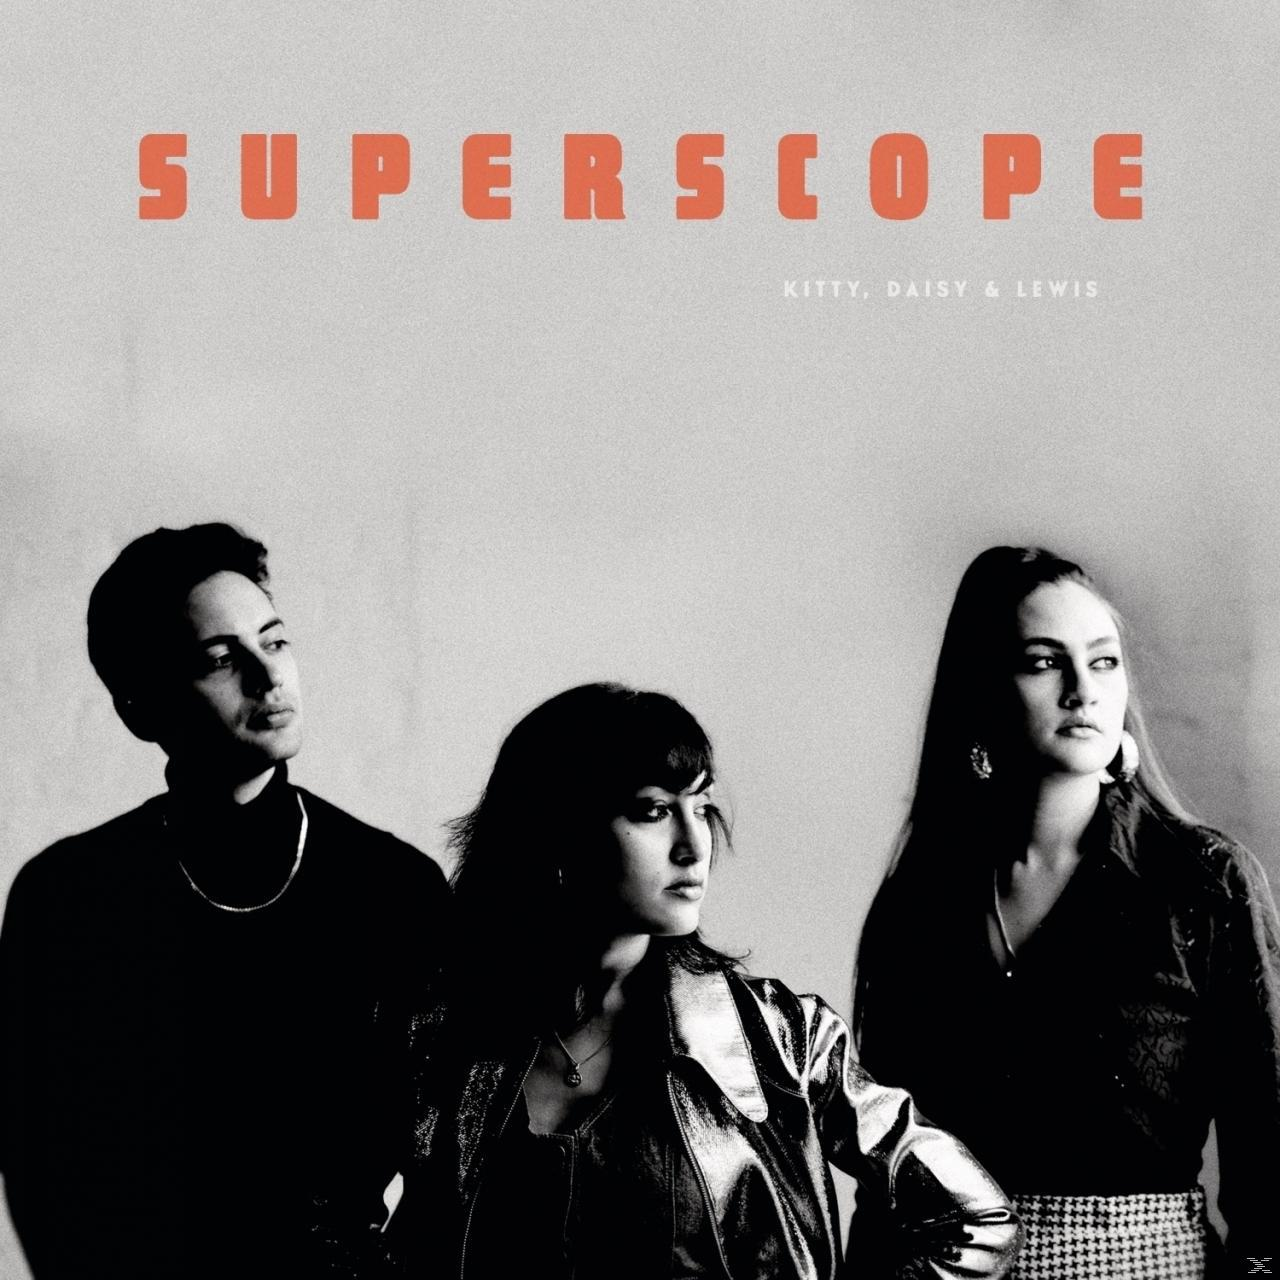 Kitty, Daisy & Lewis - (CD) - Superscope